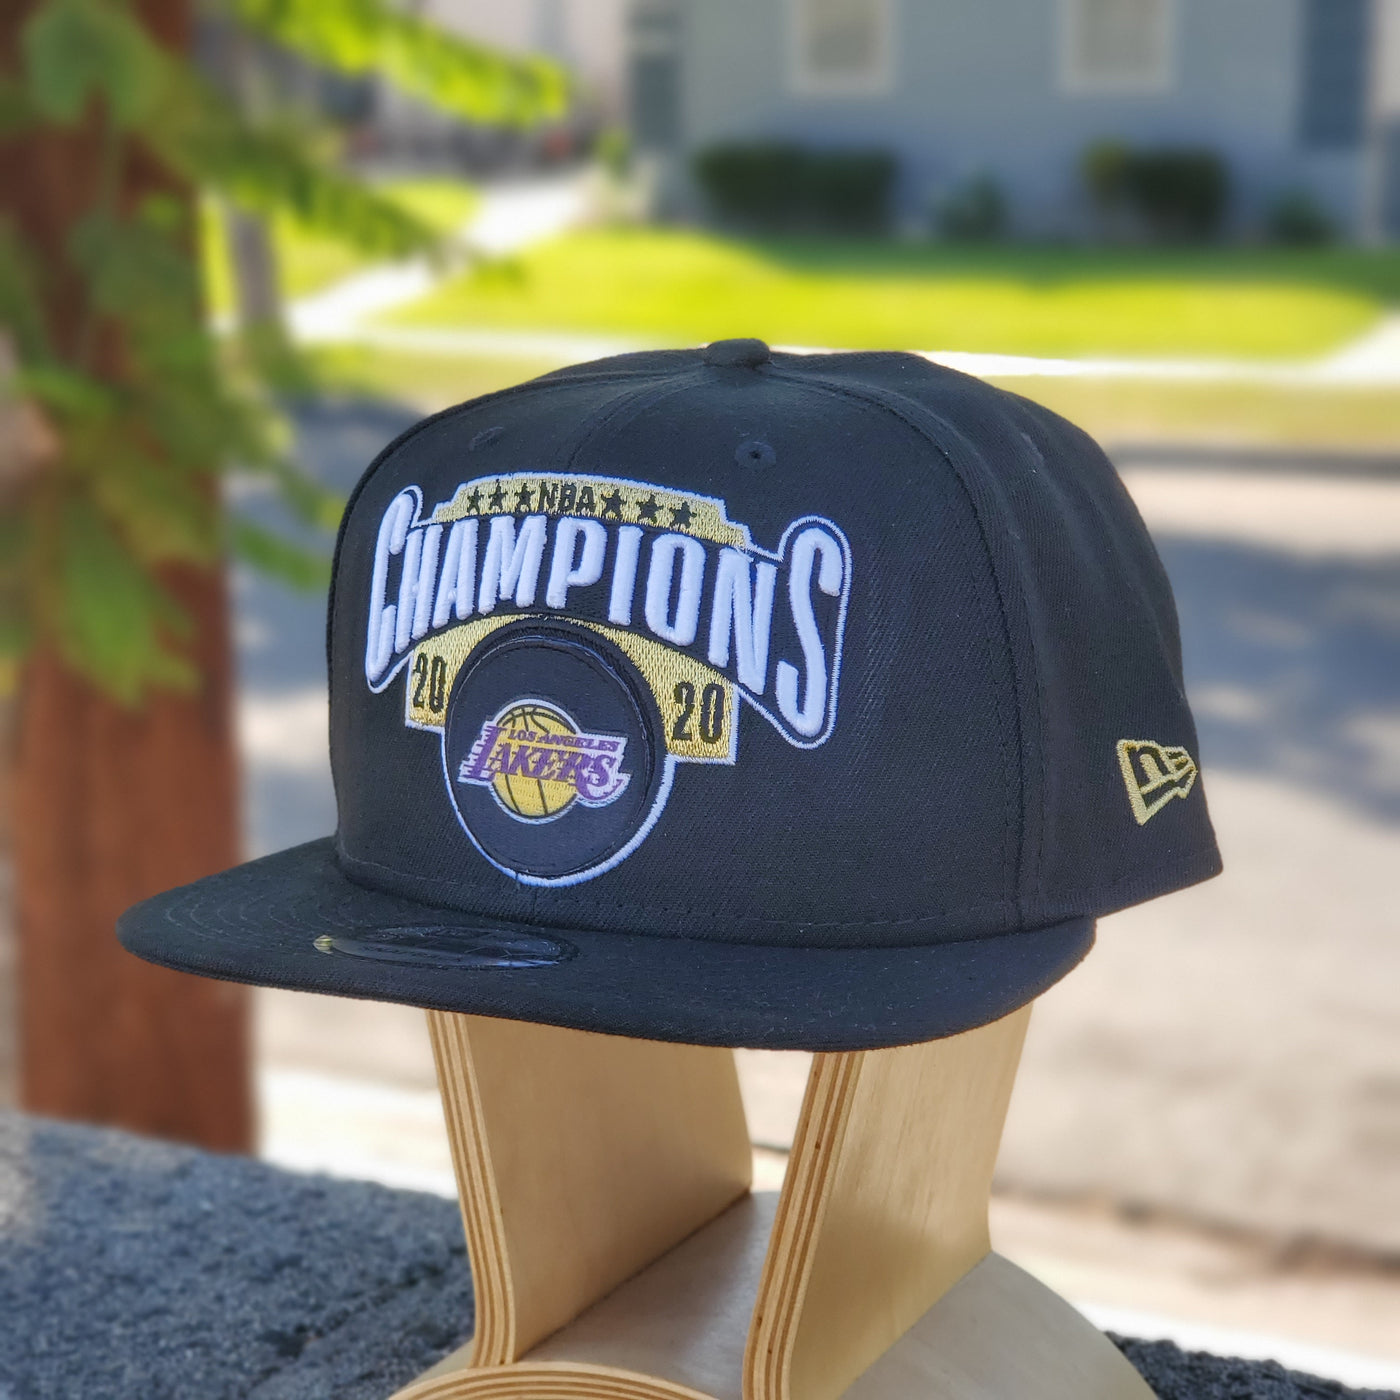 LOS ANGELES LAKERS NBA AUTHENTICS 2020 CHAMPIONSHIPS 9FIFTY SNAPBACK